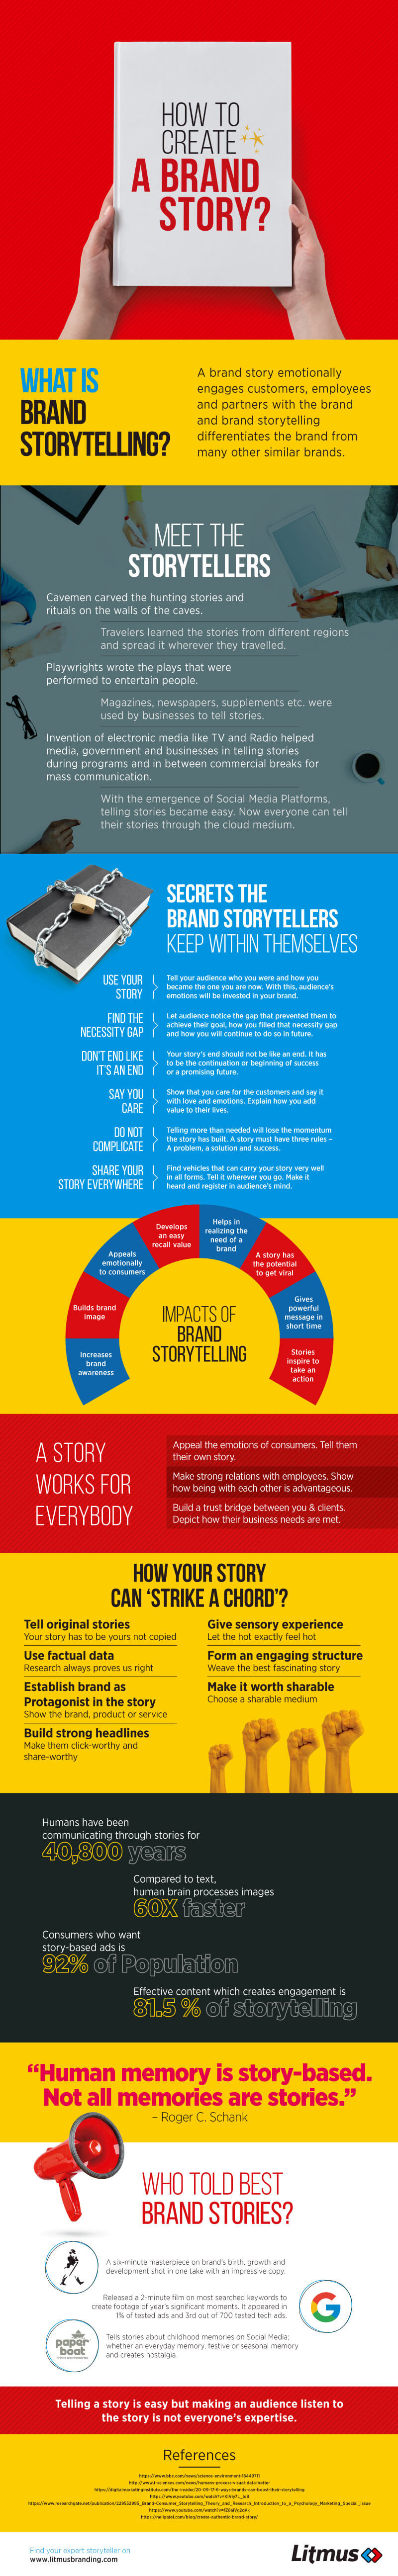 How to create a brand story